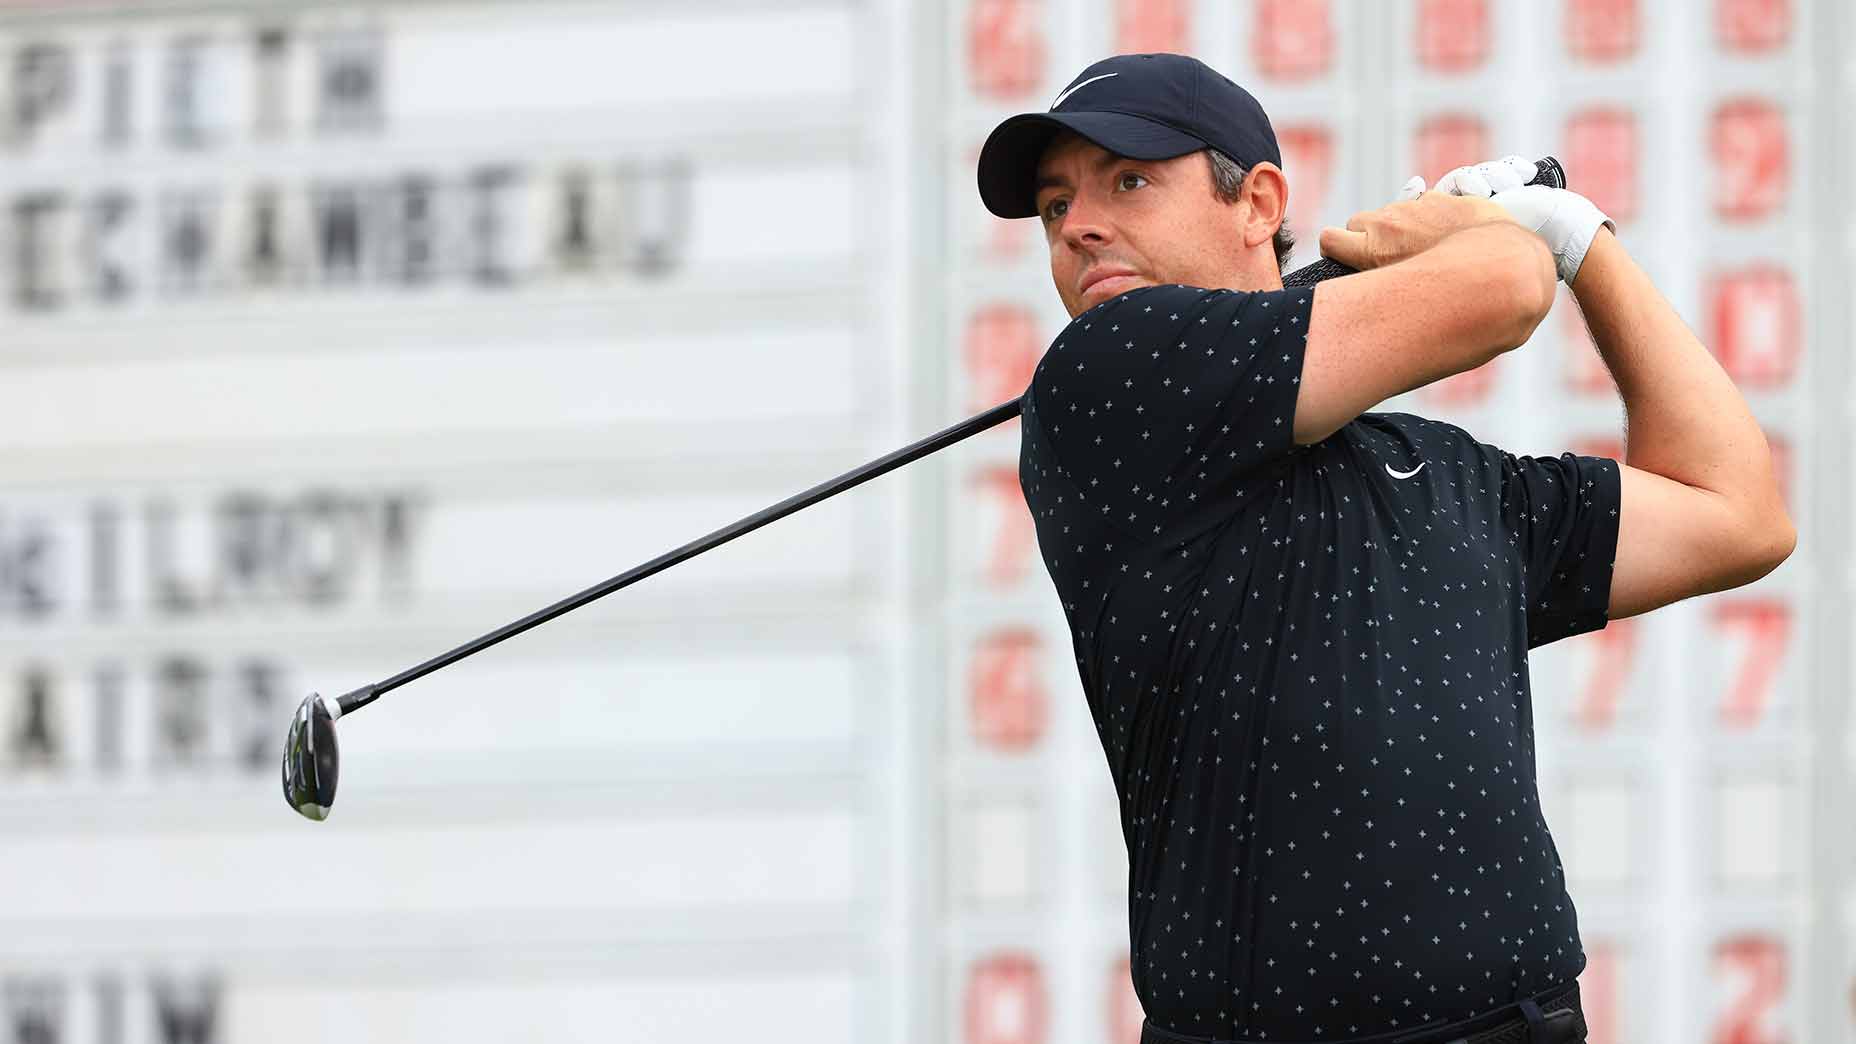 McIlroy: Player Impact Program about more than rewarding top players